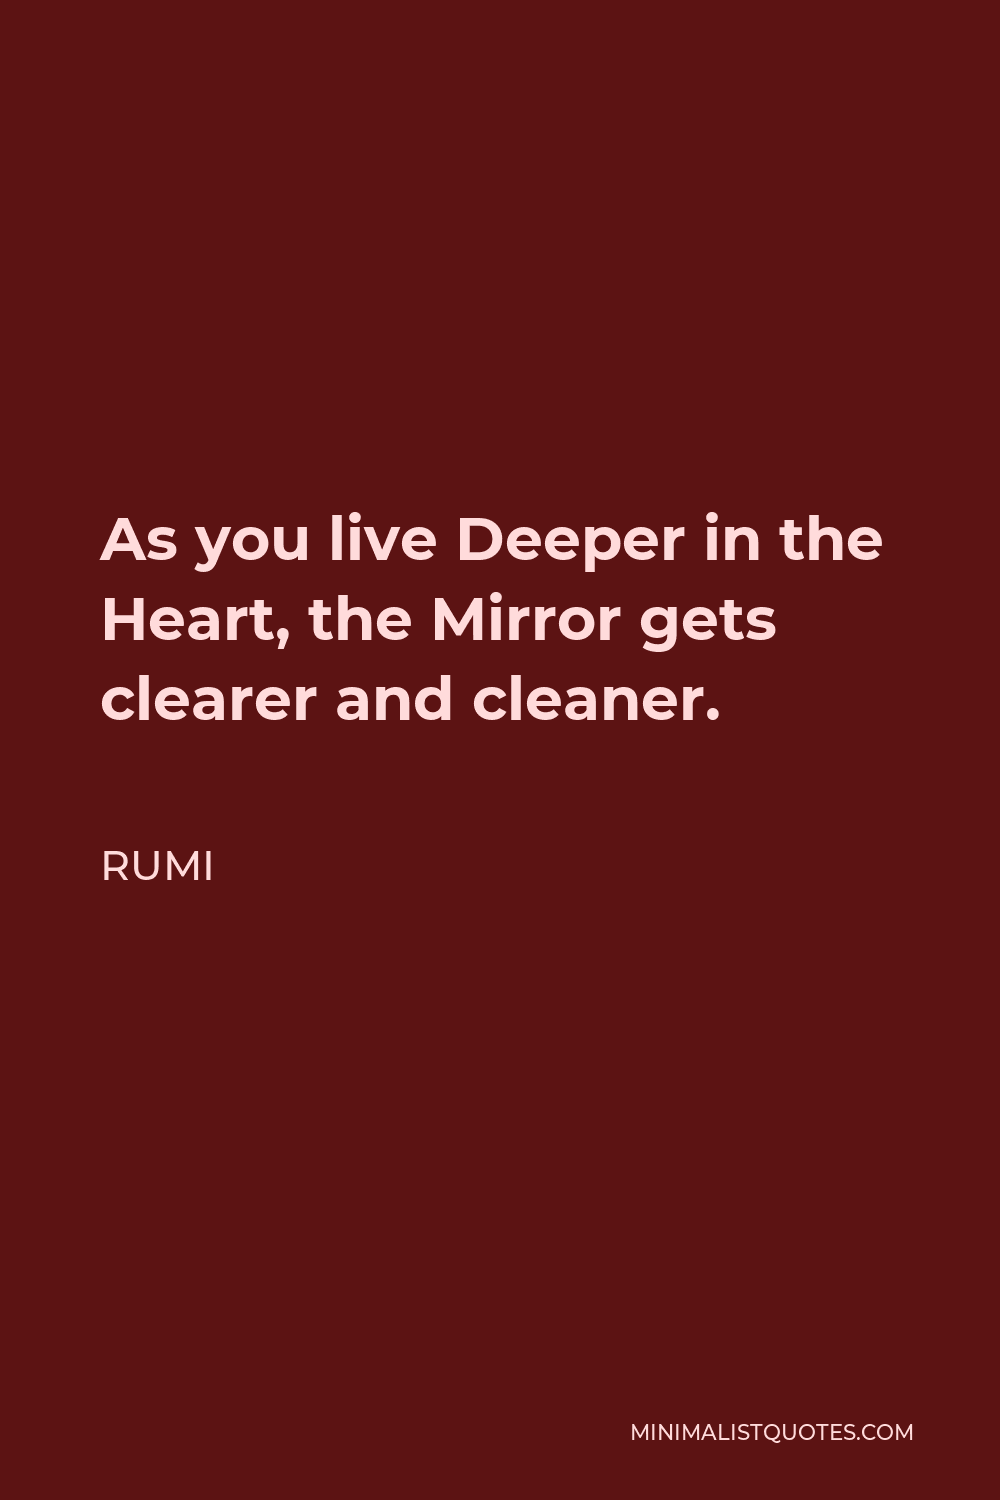 Rumi Quote - As you live Deeper in the Heart, the Mirror gets clearer and cleaner.